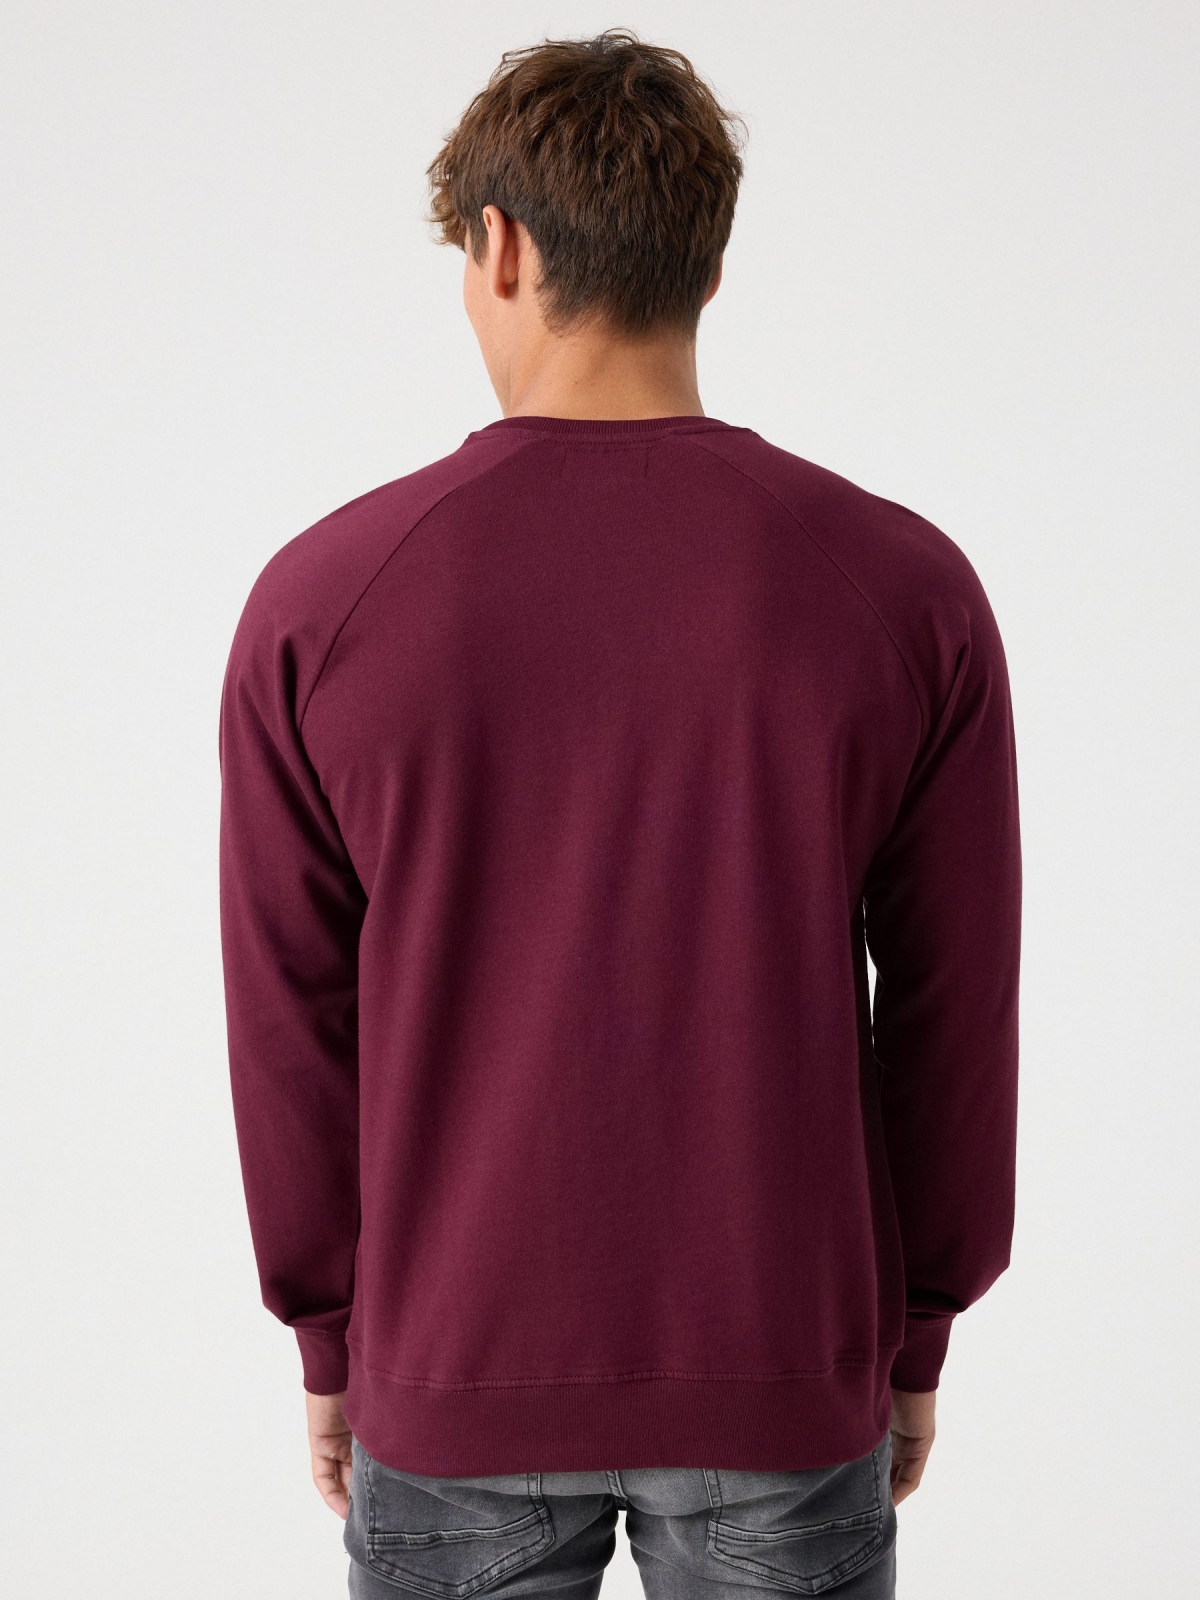 Basic sweatshirt with text garnet middle back view